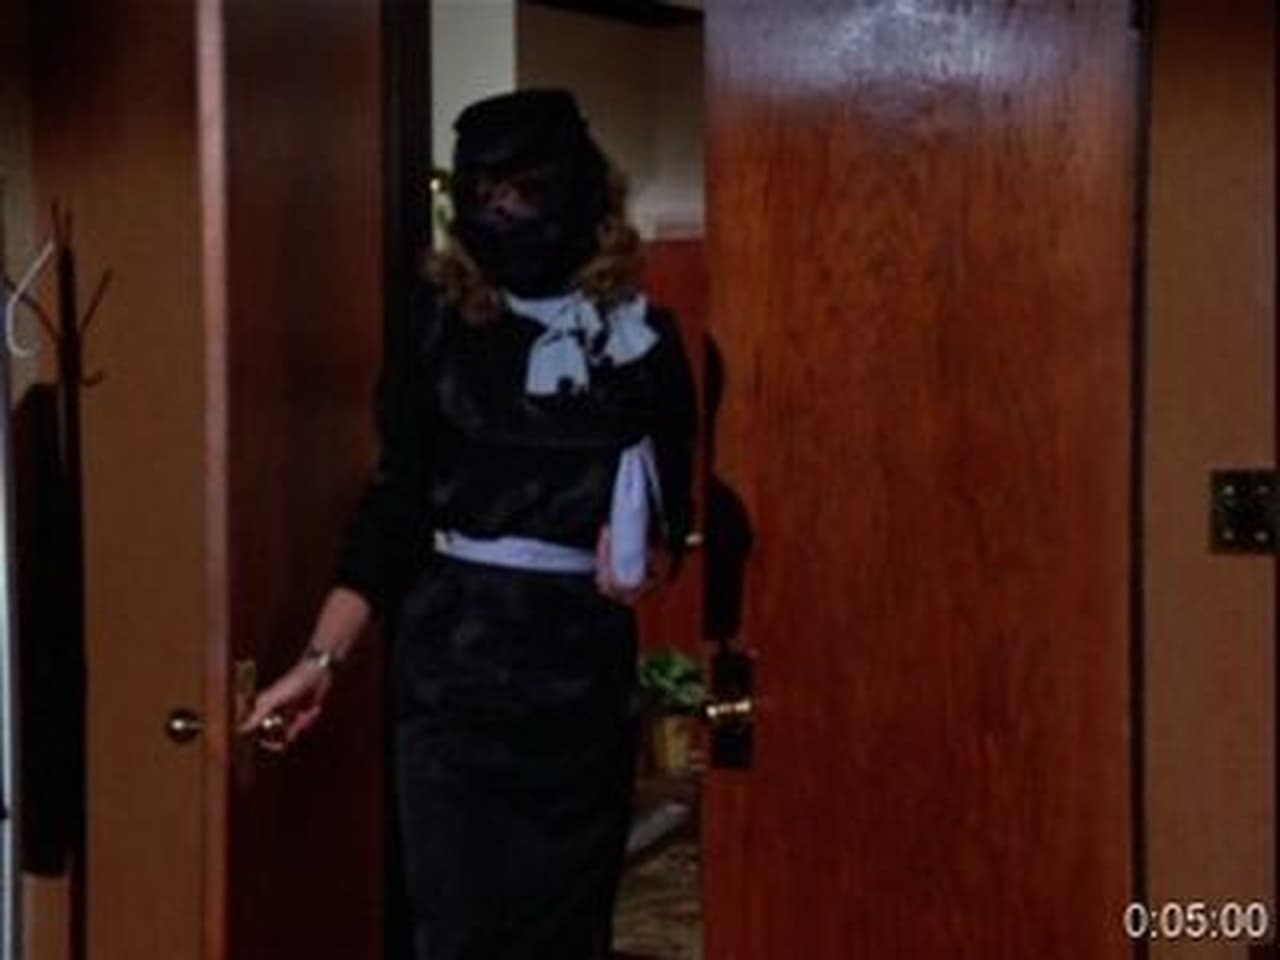 Moonlighting - Season 2 Episode 2 : The Lady in the Iron Mask